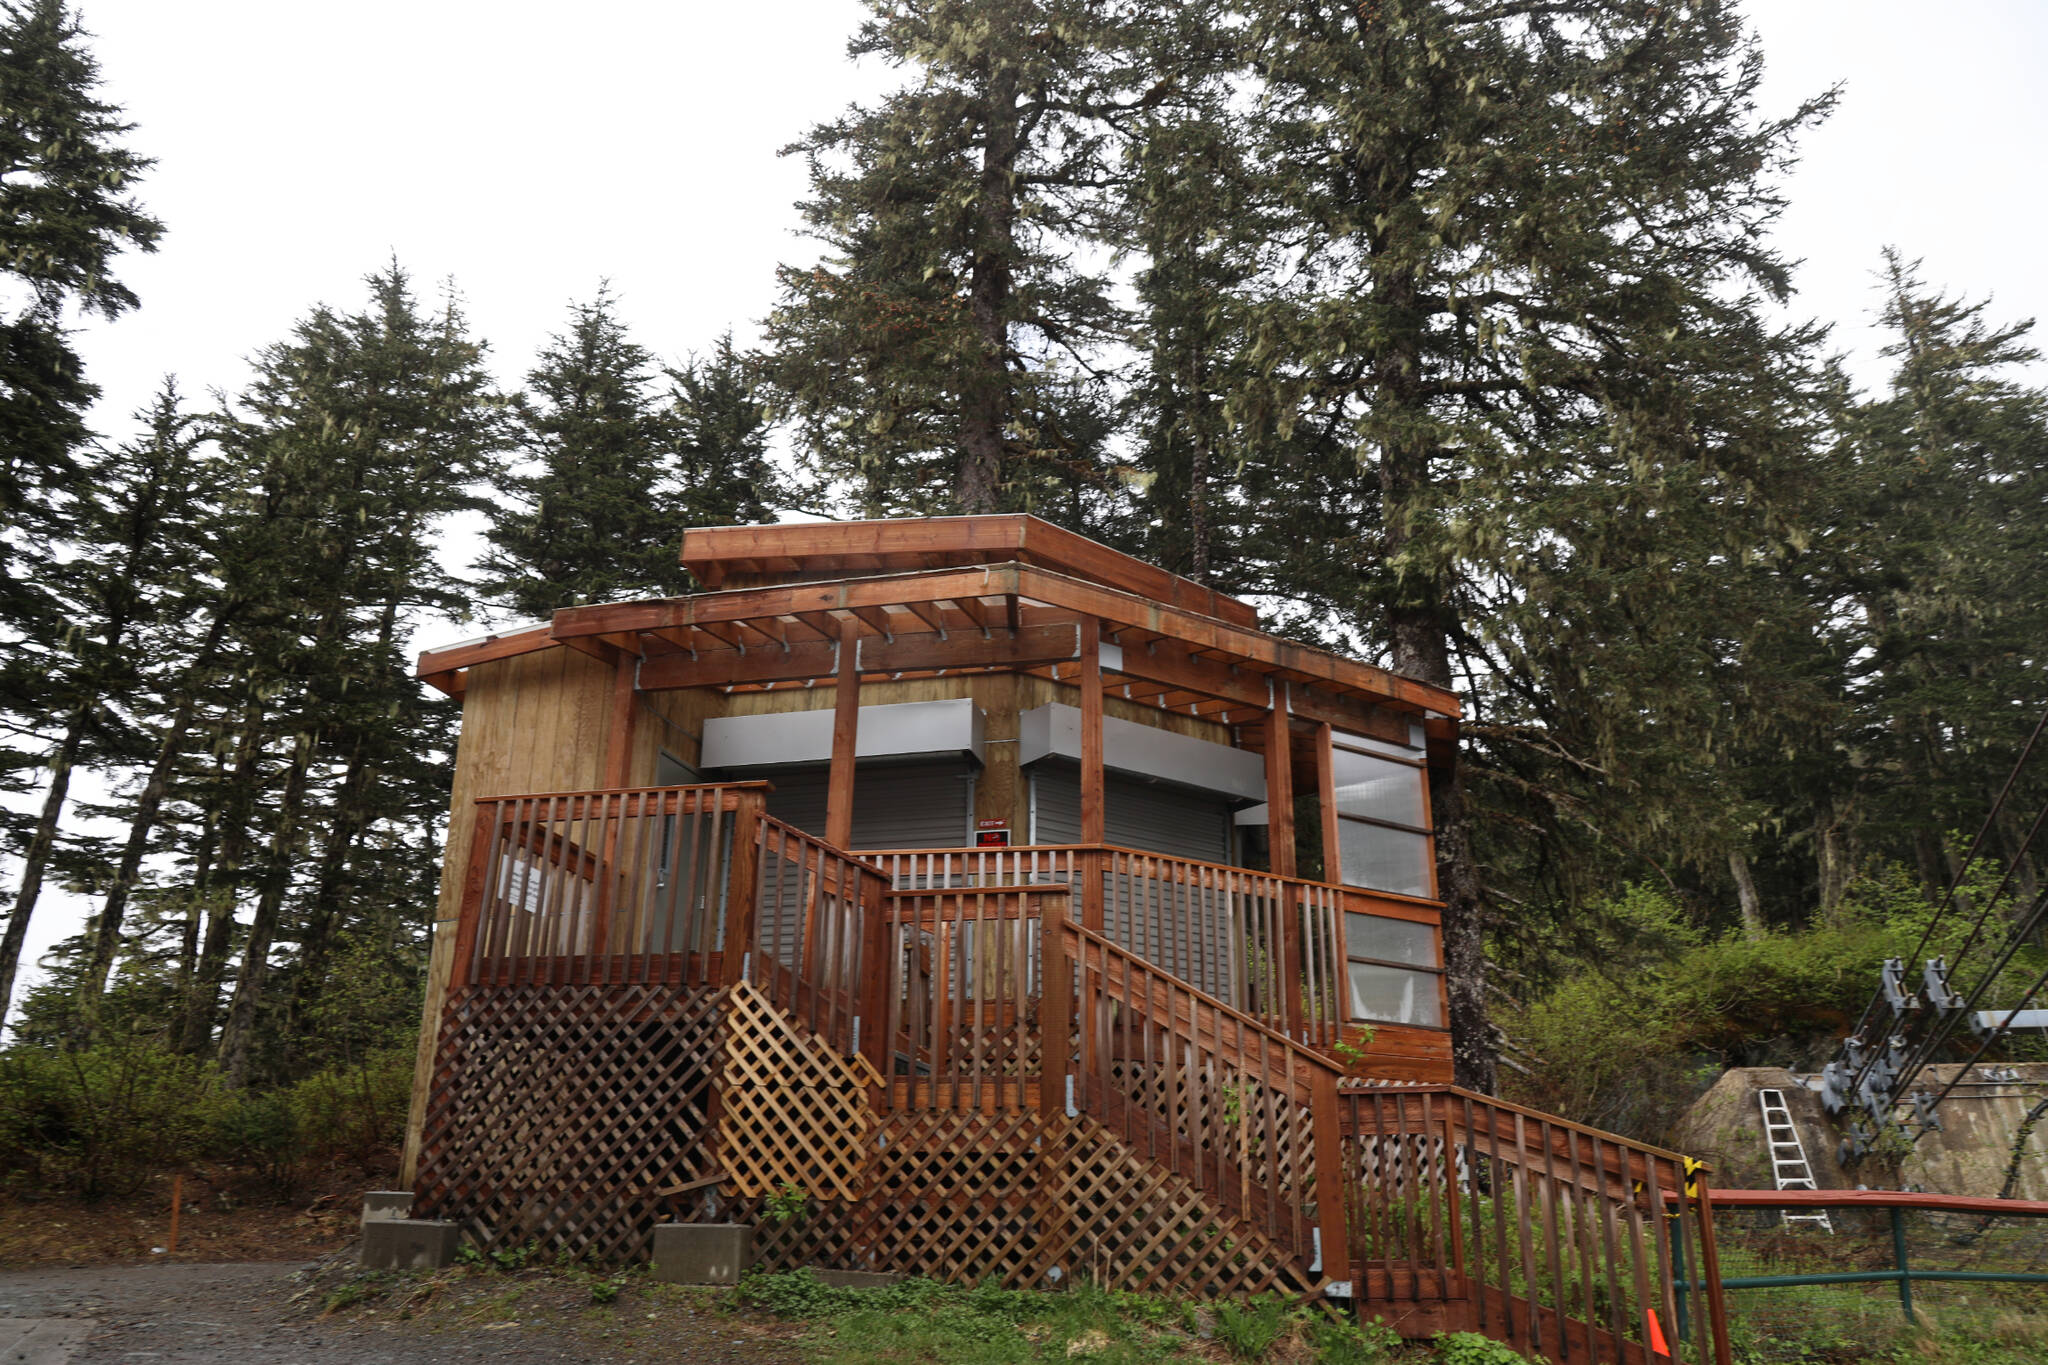 The wildlife shelter at the top of Mount. Roberts sits empty Friday morning. The building future remains in limbo as it is owned by the Juneau Raptor Center, which this fall announced it would be suspending its operations by the end of 2023. (Clarise Larson / Juneau Empire)